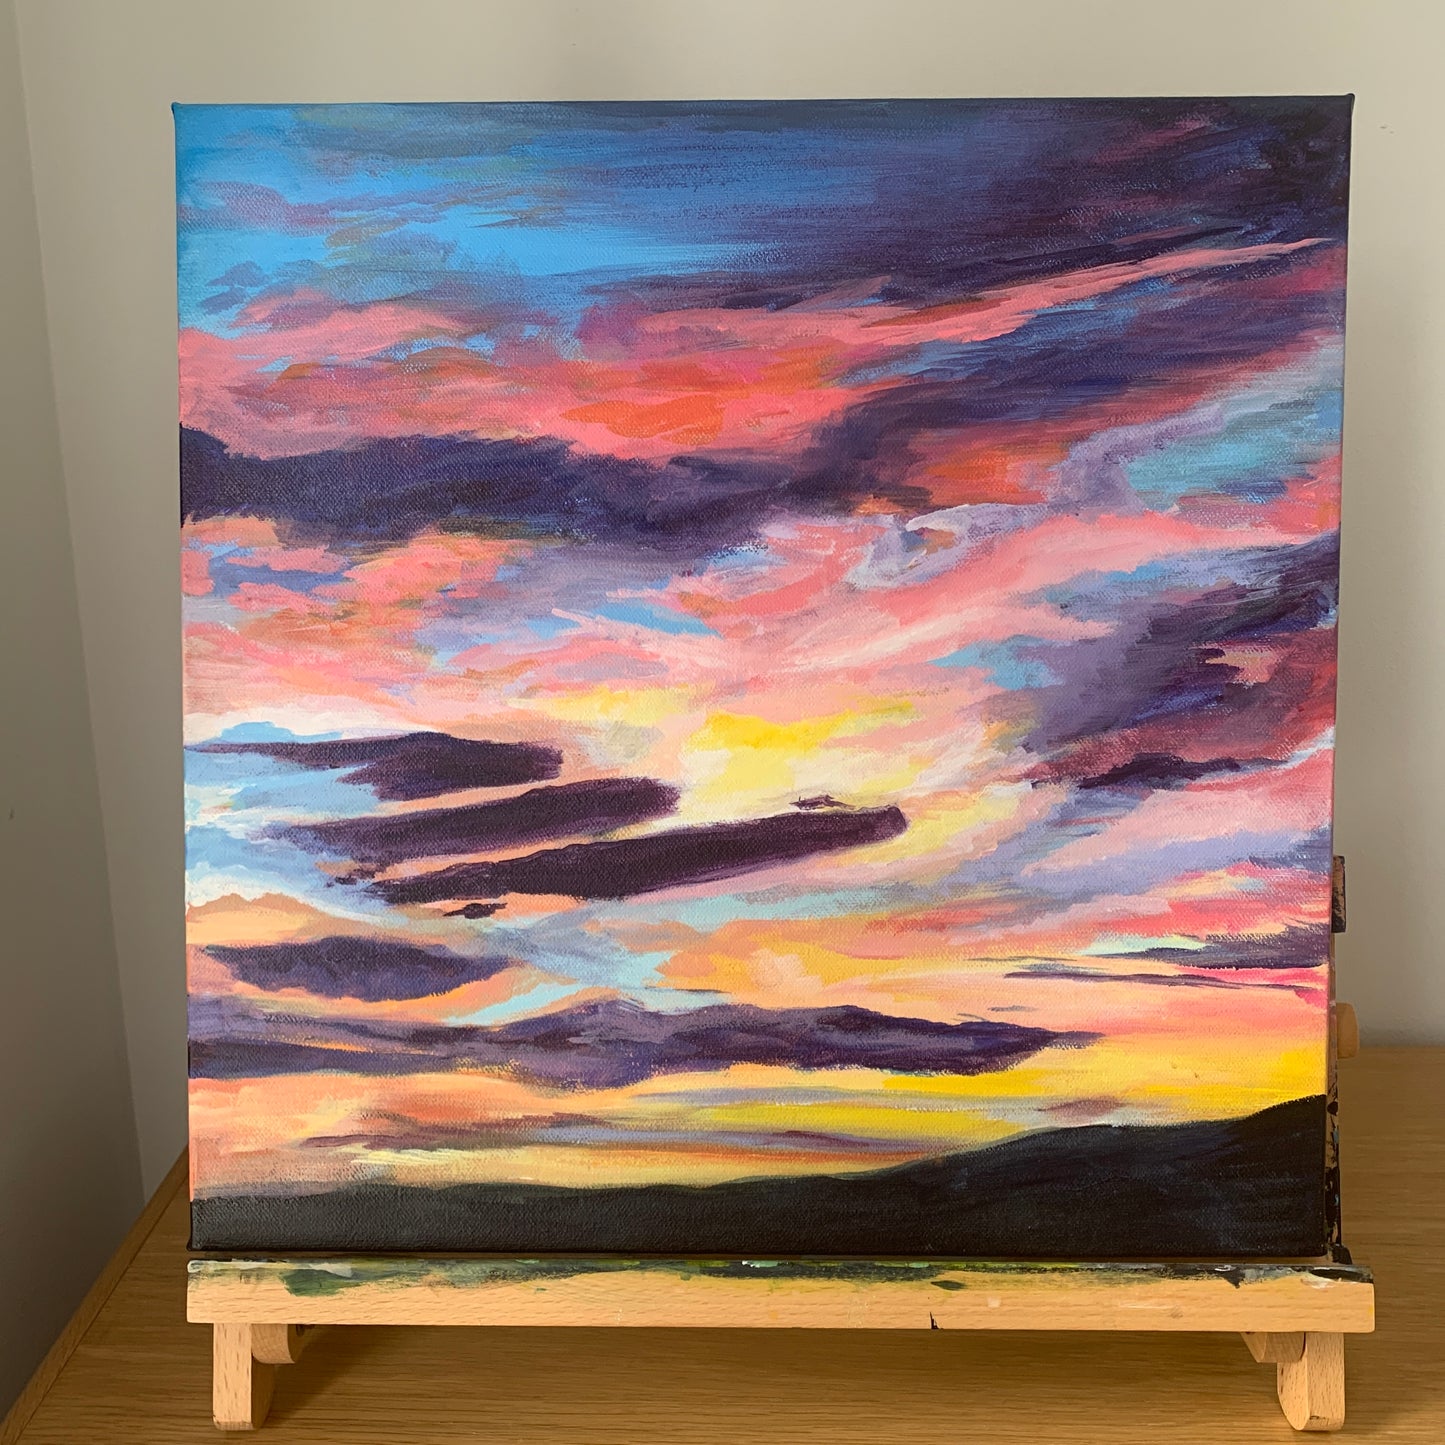 Abstracted Tranquil Sunset - Original Acrylic Painting on Canvas